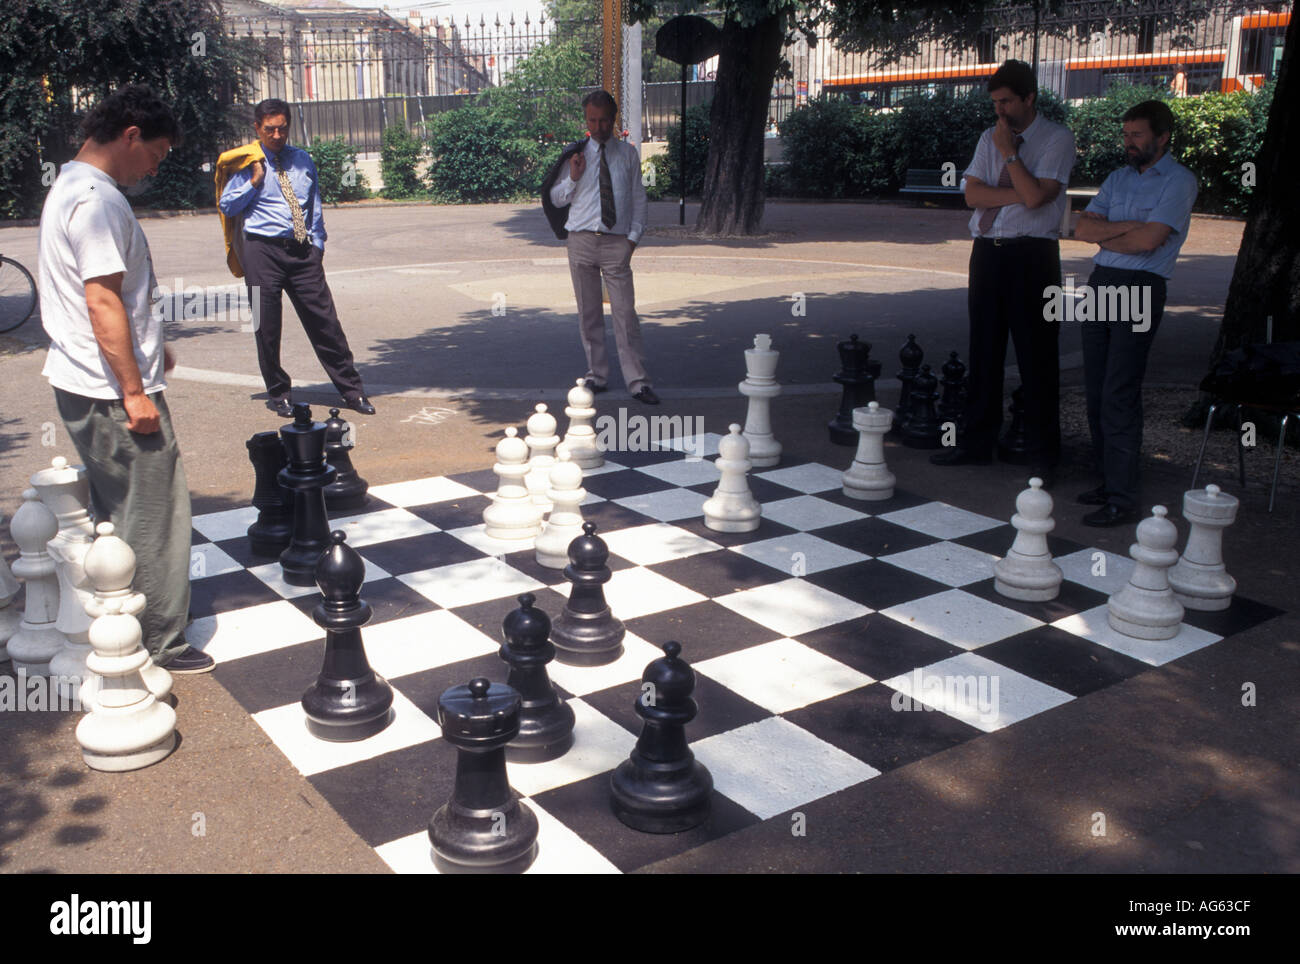 Geneva Switzerland Giant Chess Game High Resolution Stock Photography and  Images - Alamy